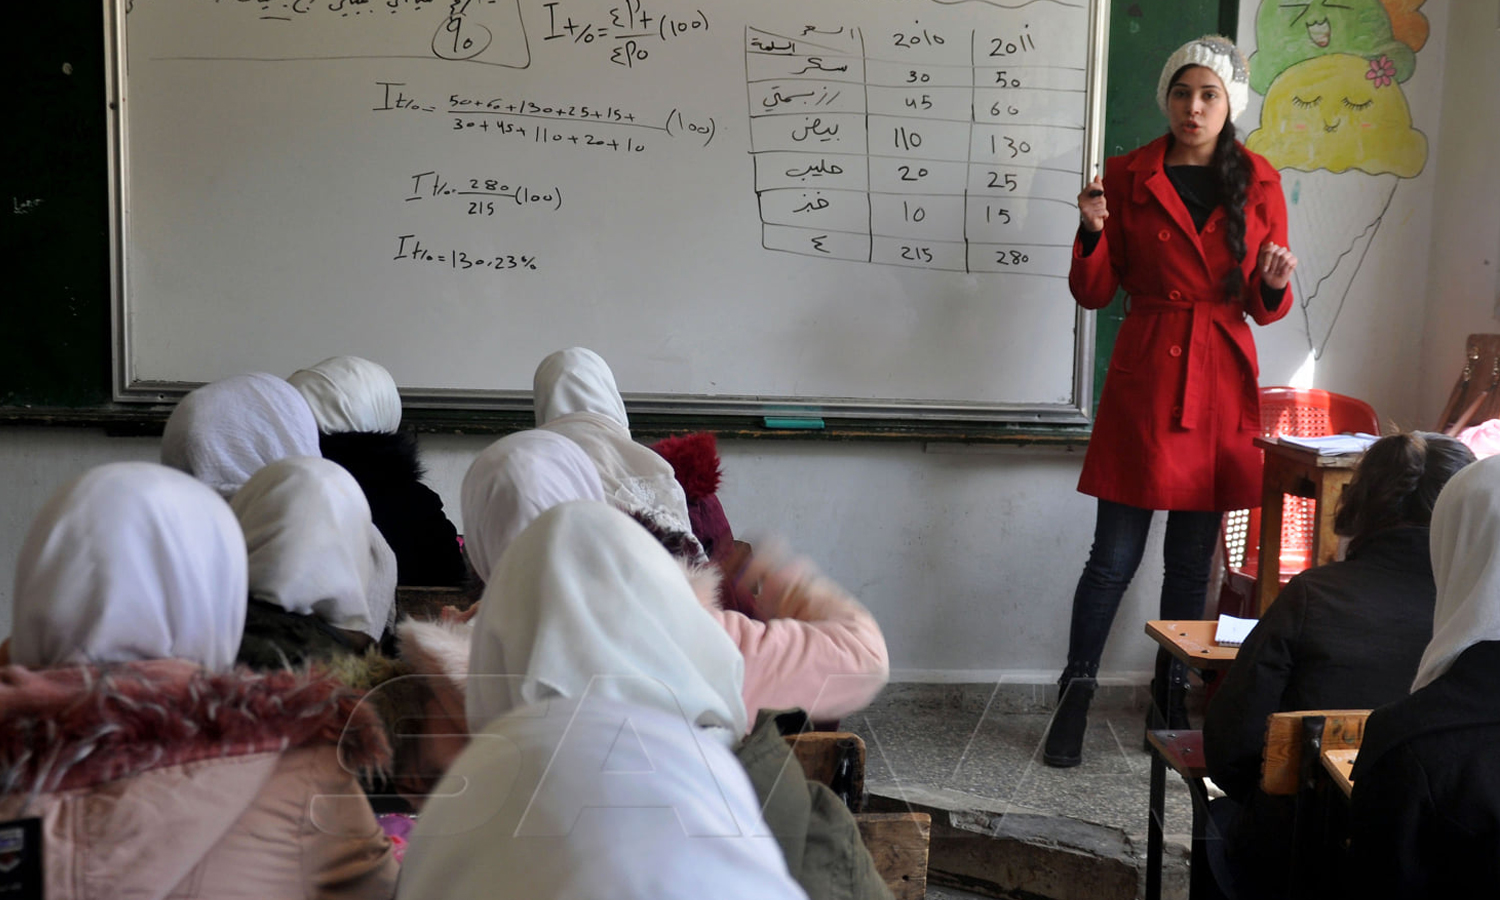 A teacher gives a lesson in a school in the city of Homs in central Syria - 16 March 2022 (SANA)